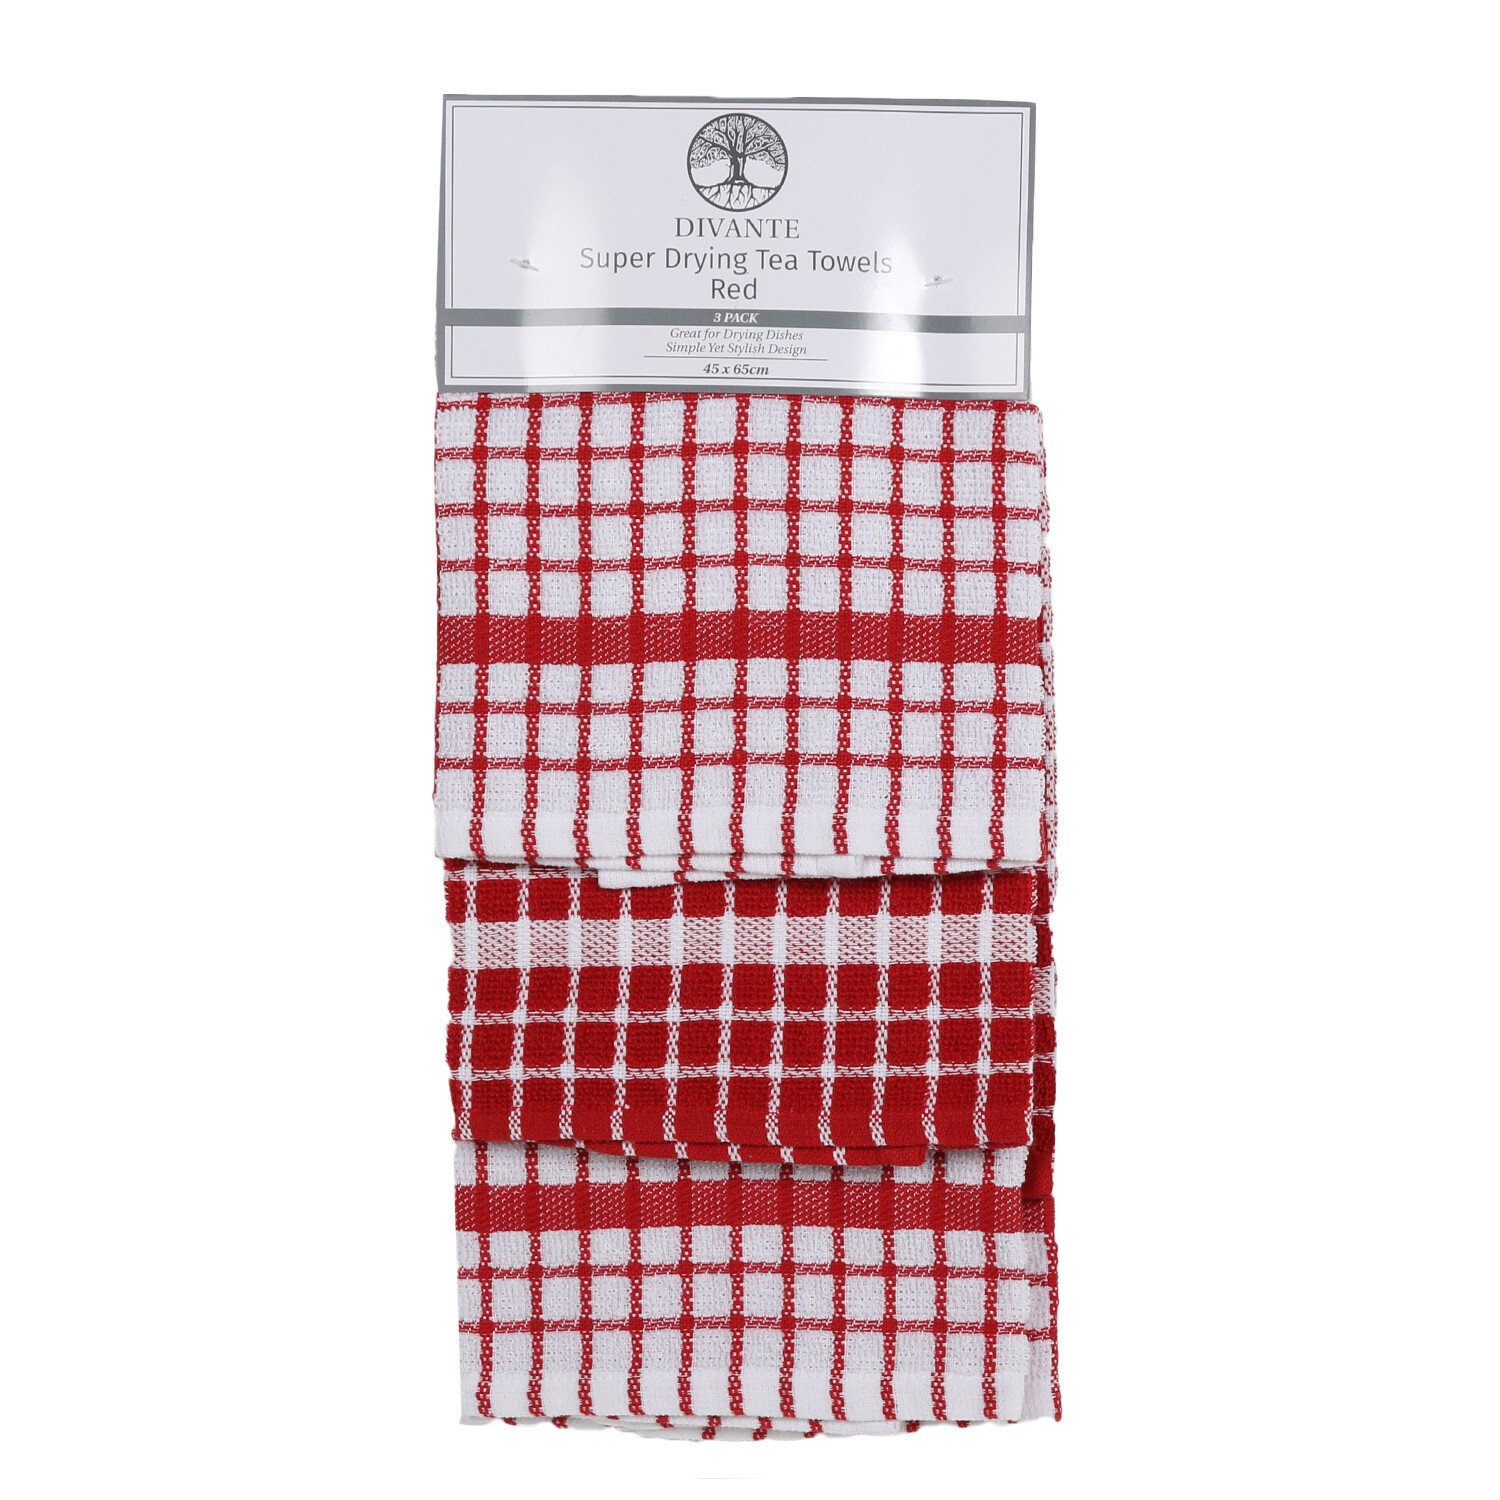 Pack of 3 Super Drying Tea Towels - Red Image